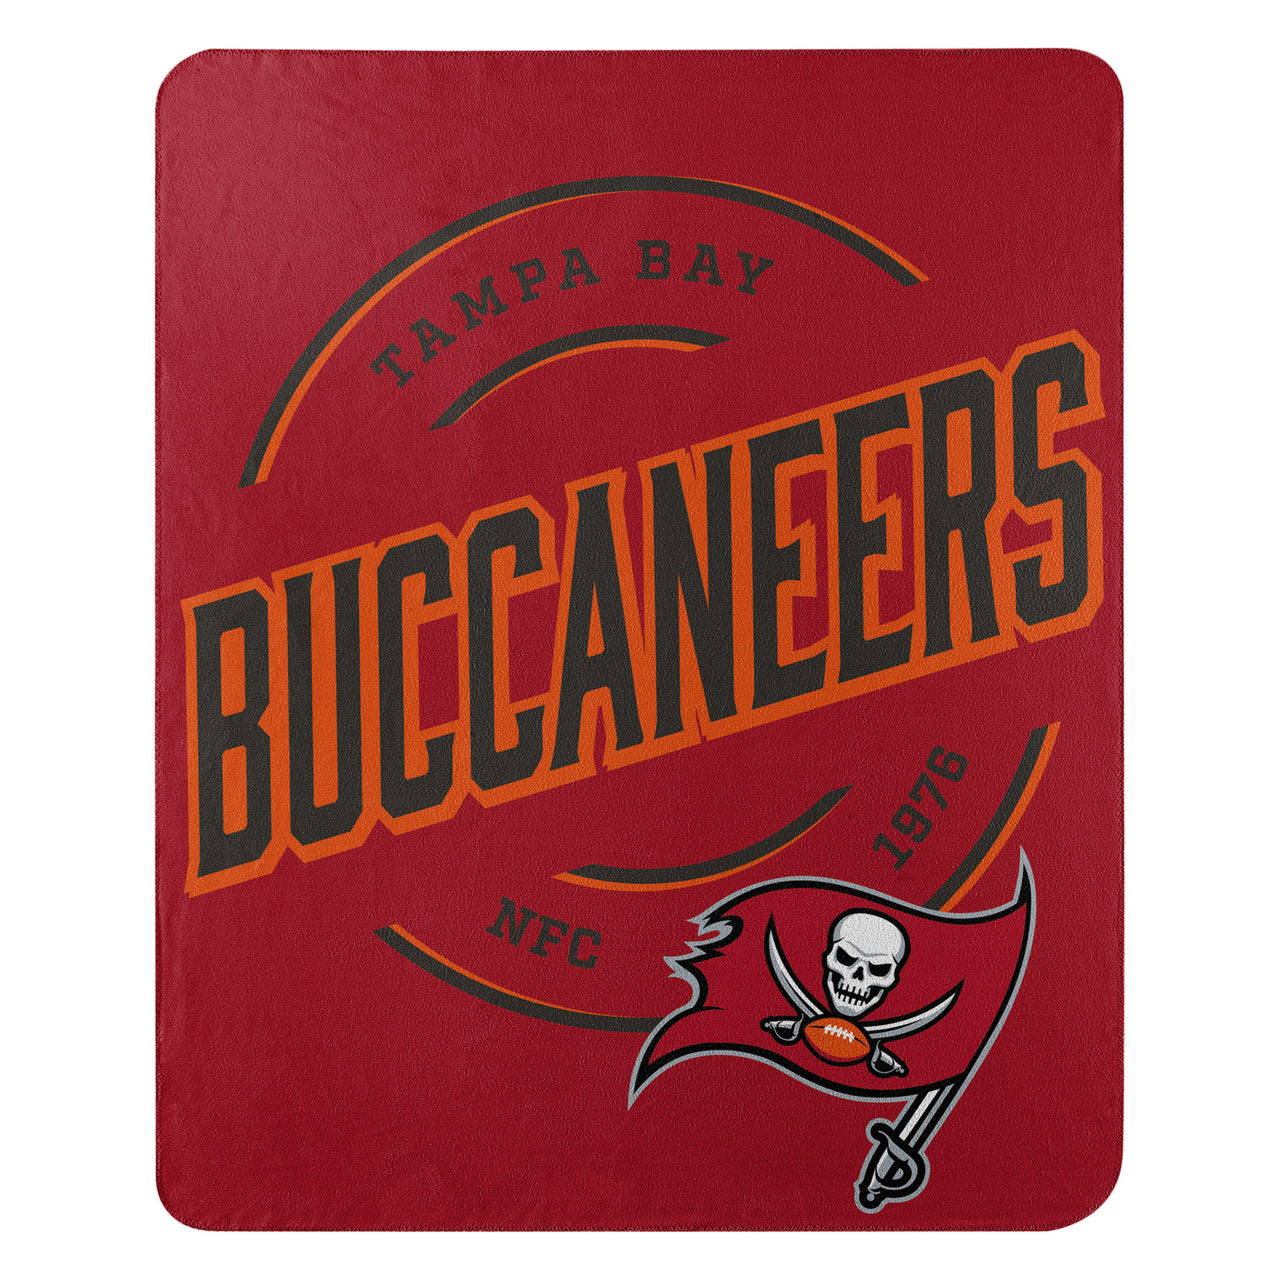 Tampa Bay Buccaneers 50" x 60" Campaign Fleece Blanket - Dynasty Sports & Framing 